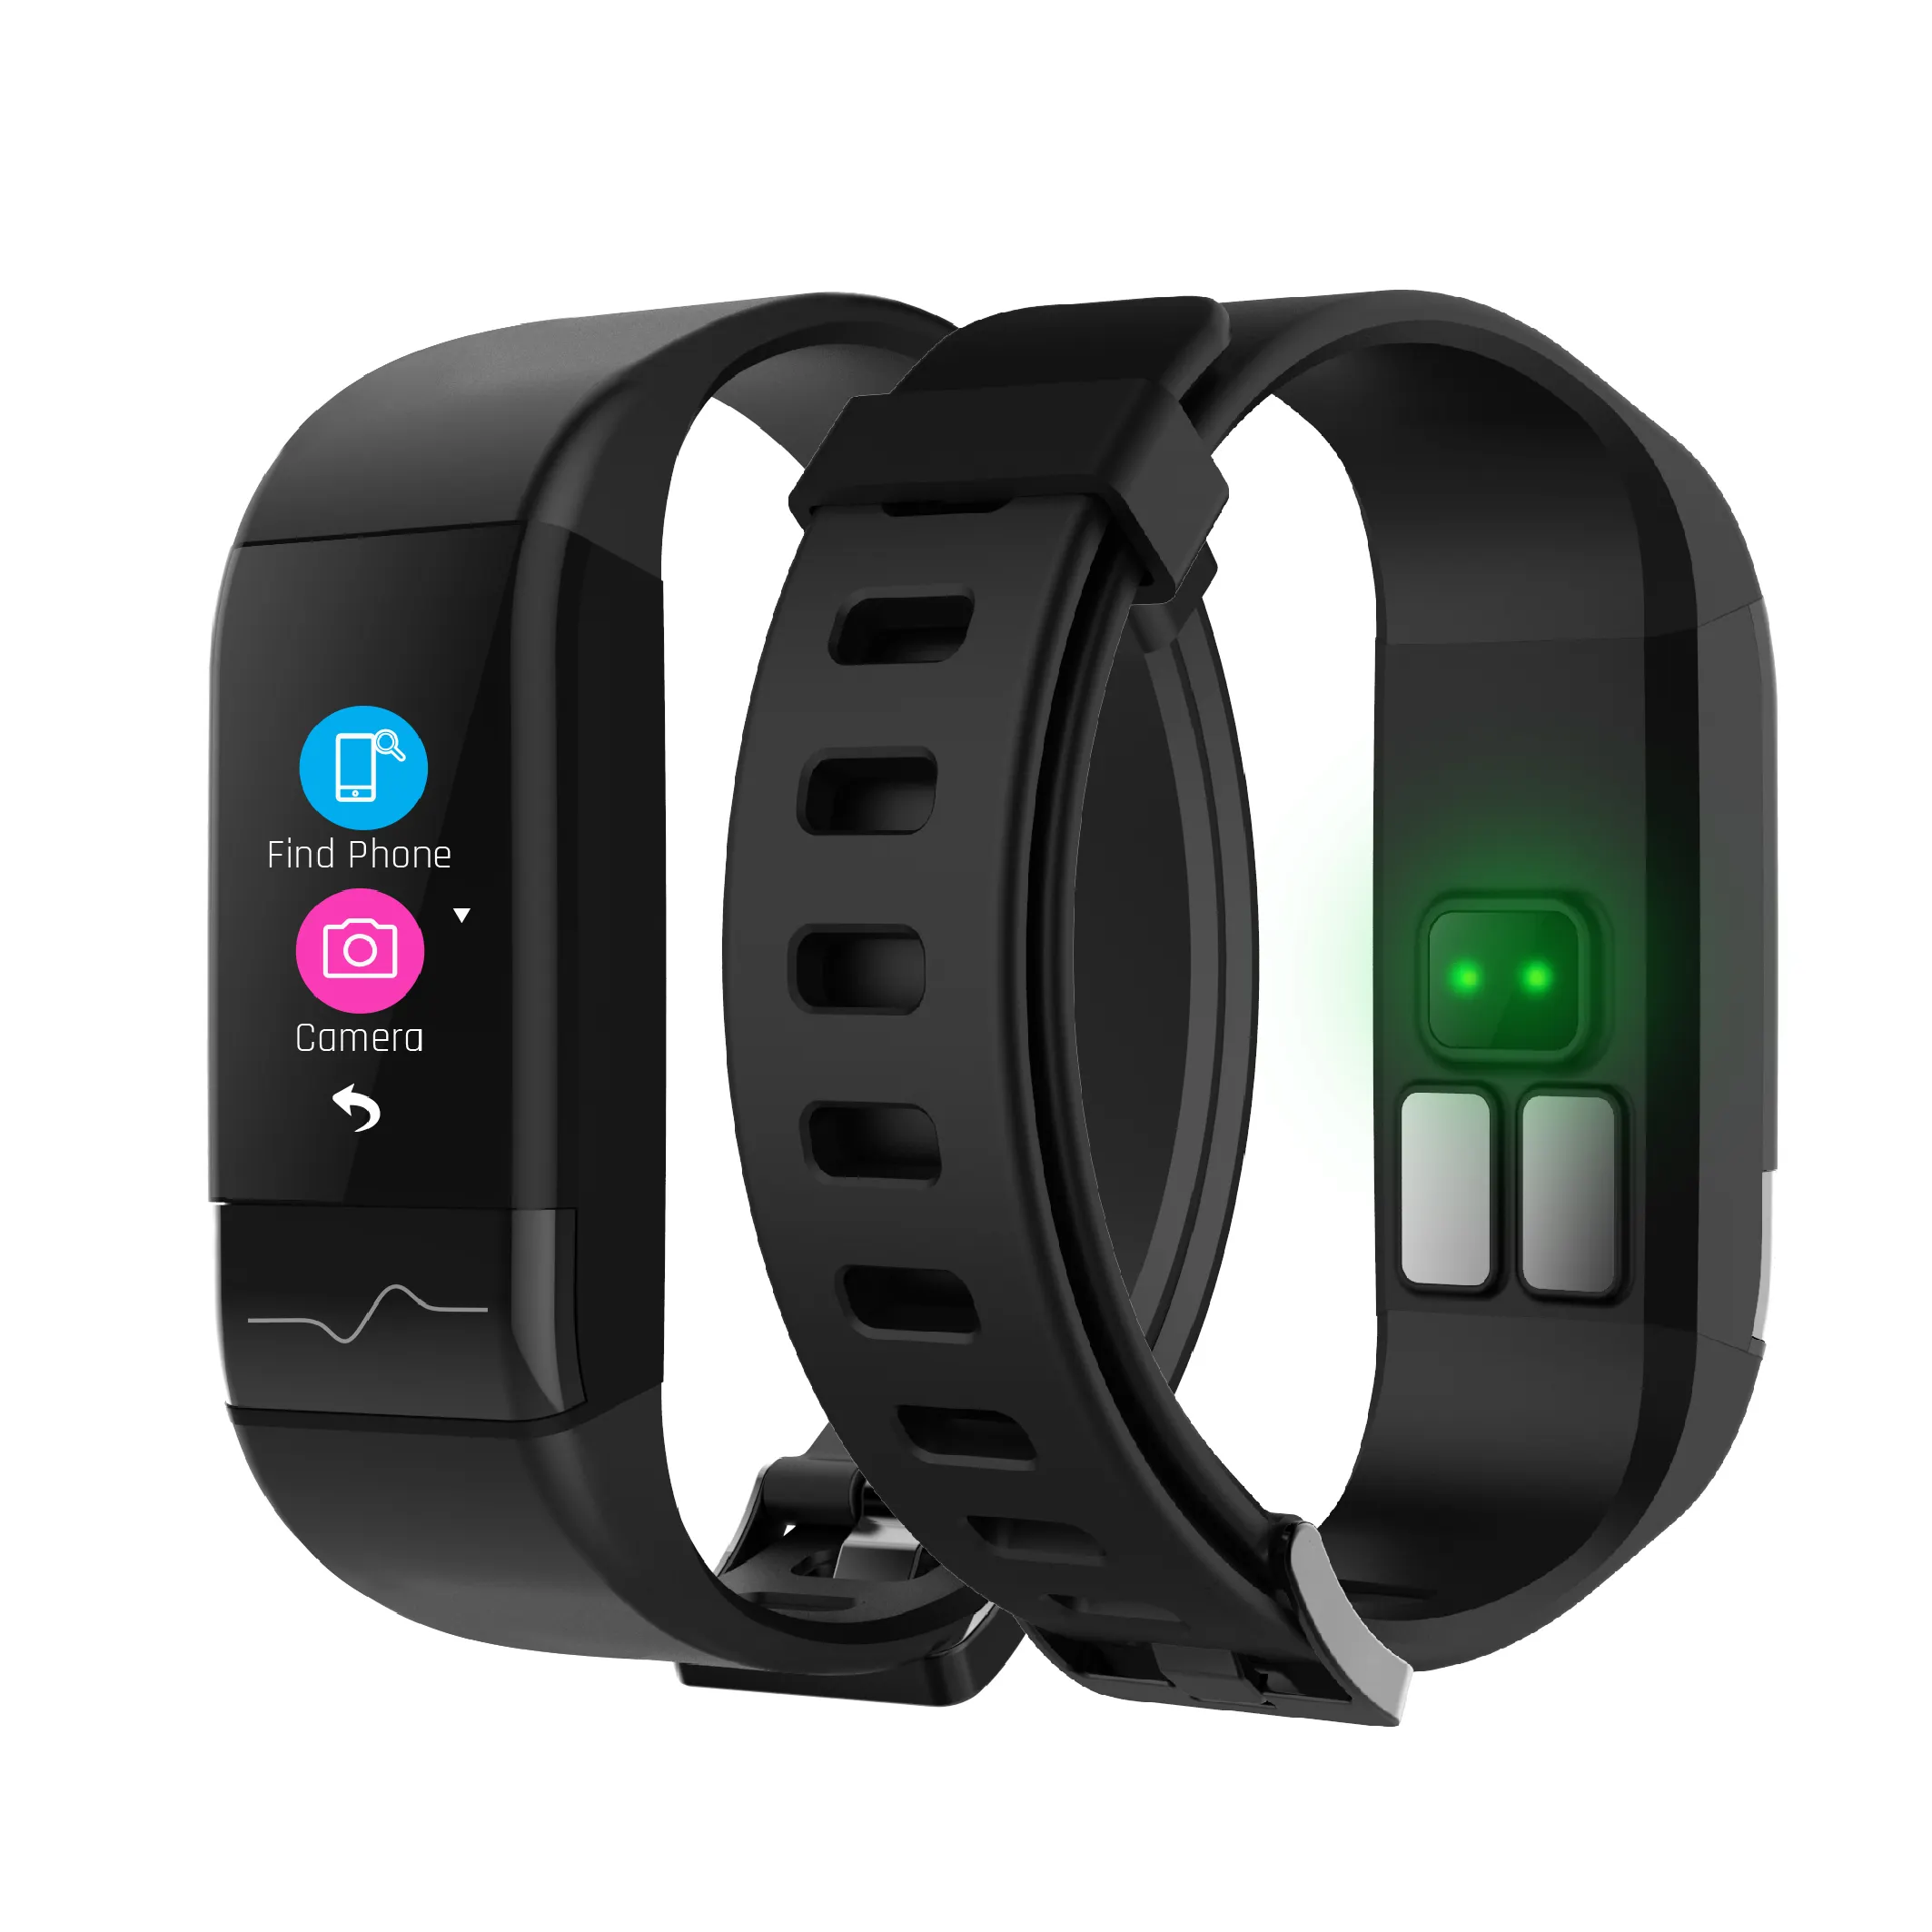 J-Style 1790 Bluetooth ECG Smart Watch SOS Alert heart rate, HRV, blood pressure, stress level healthcare monitoring wristband